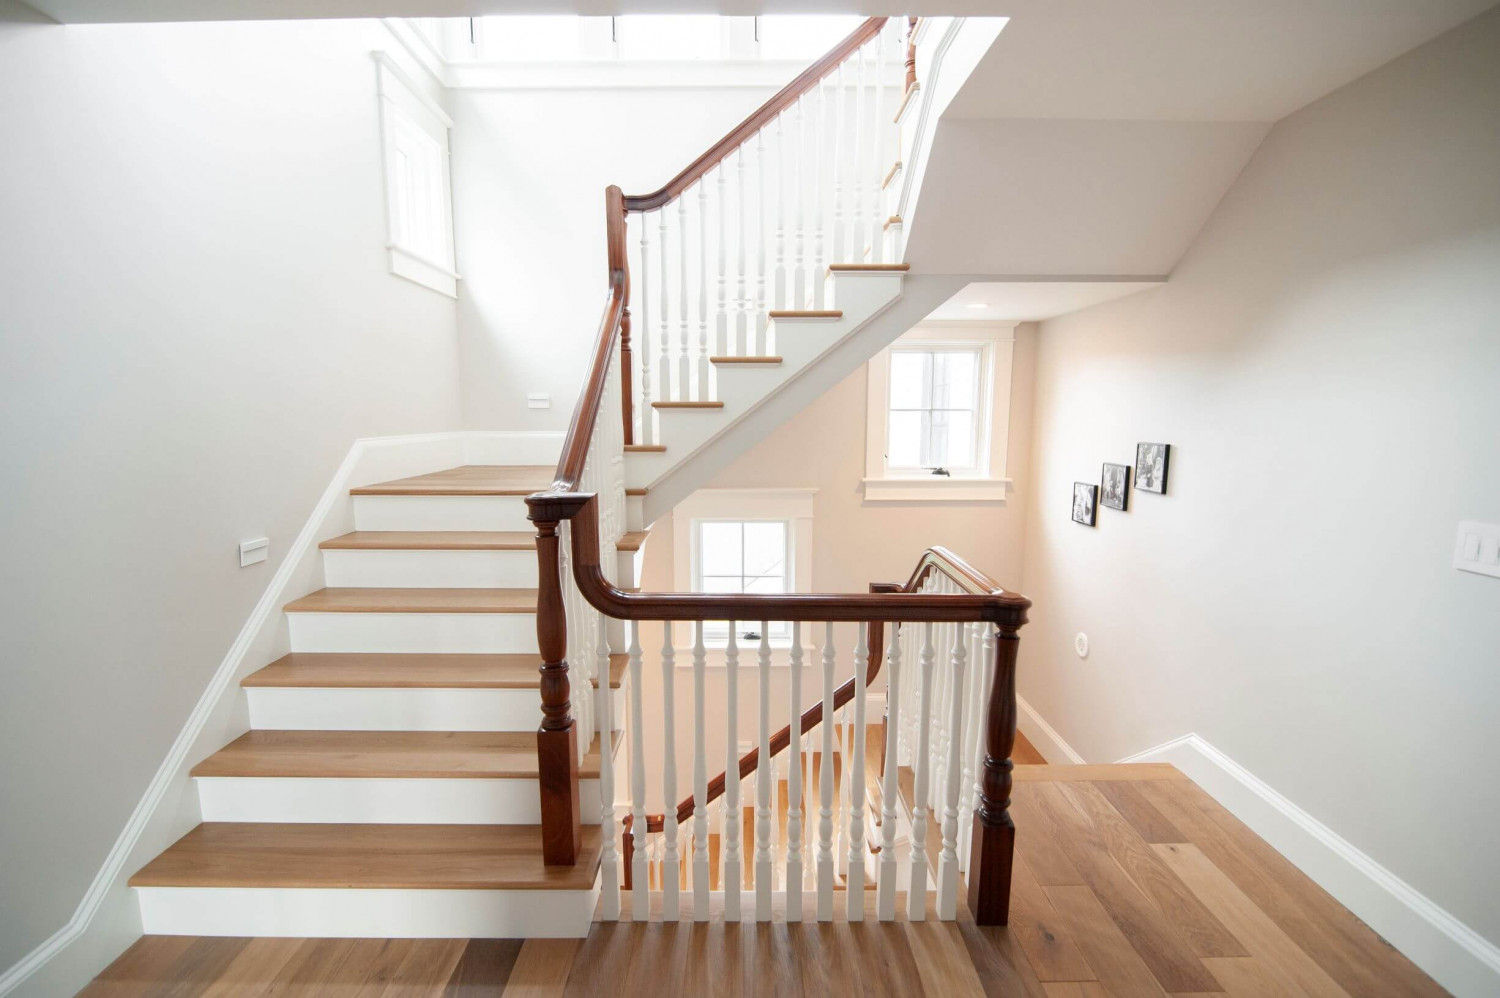 Affordable Stair Parts Supply Store - Stair Building Materials